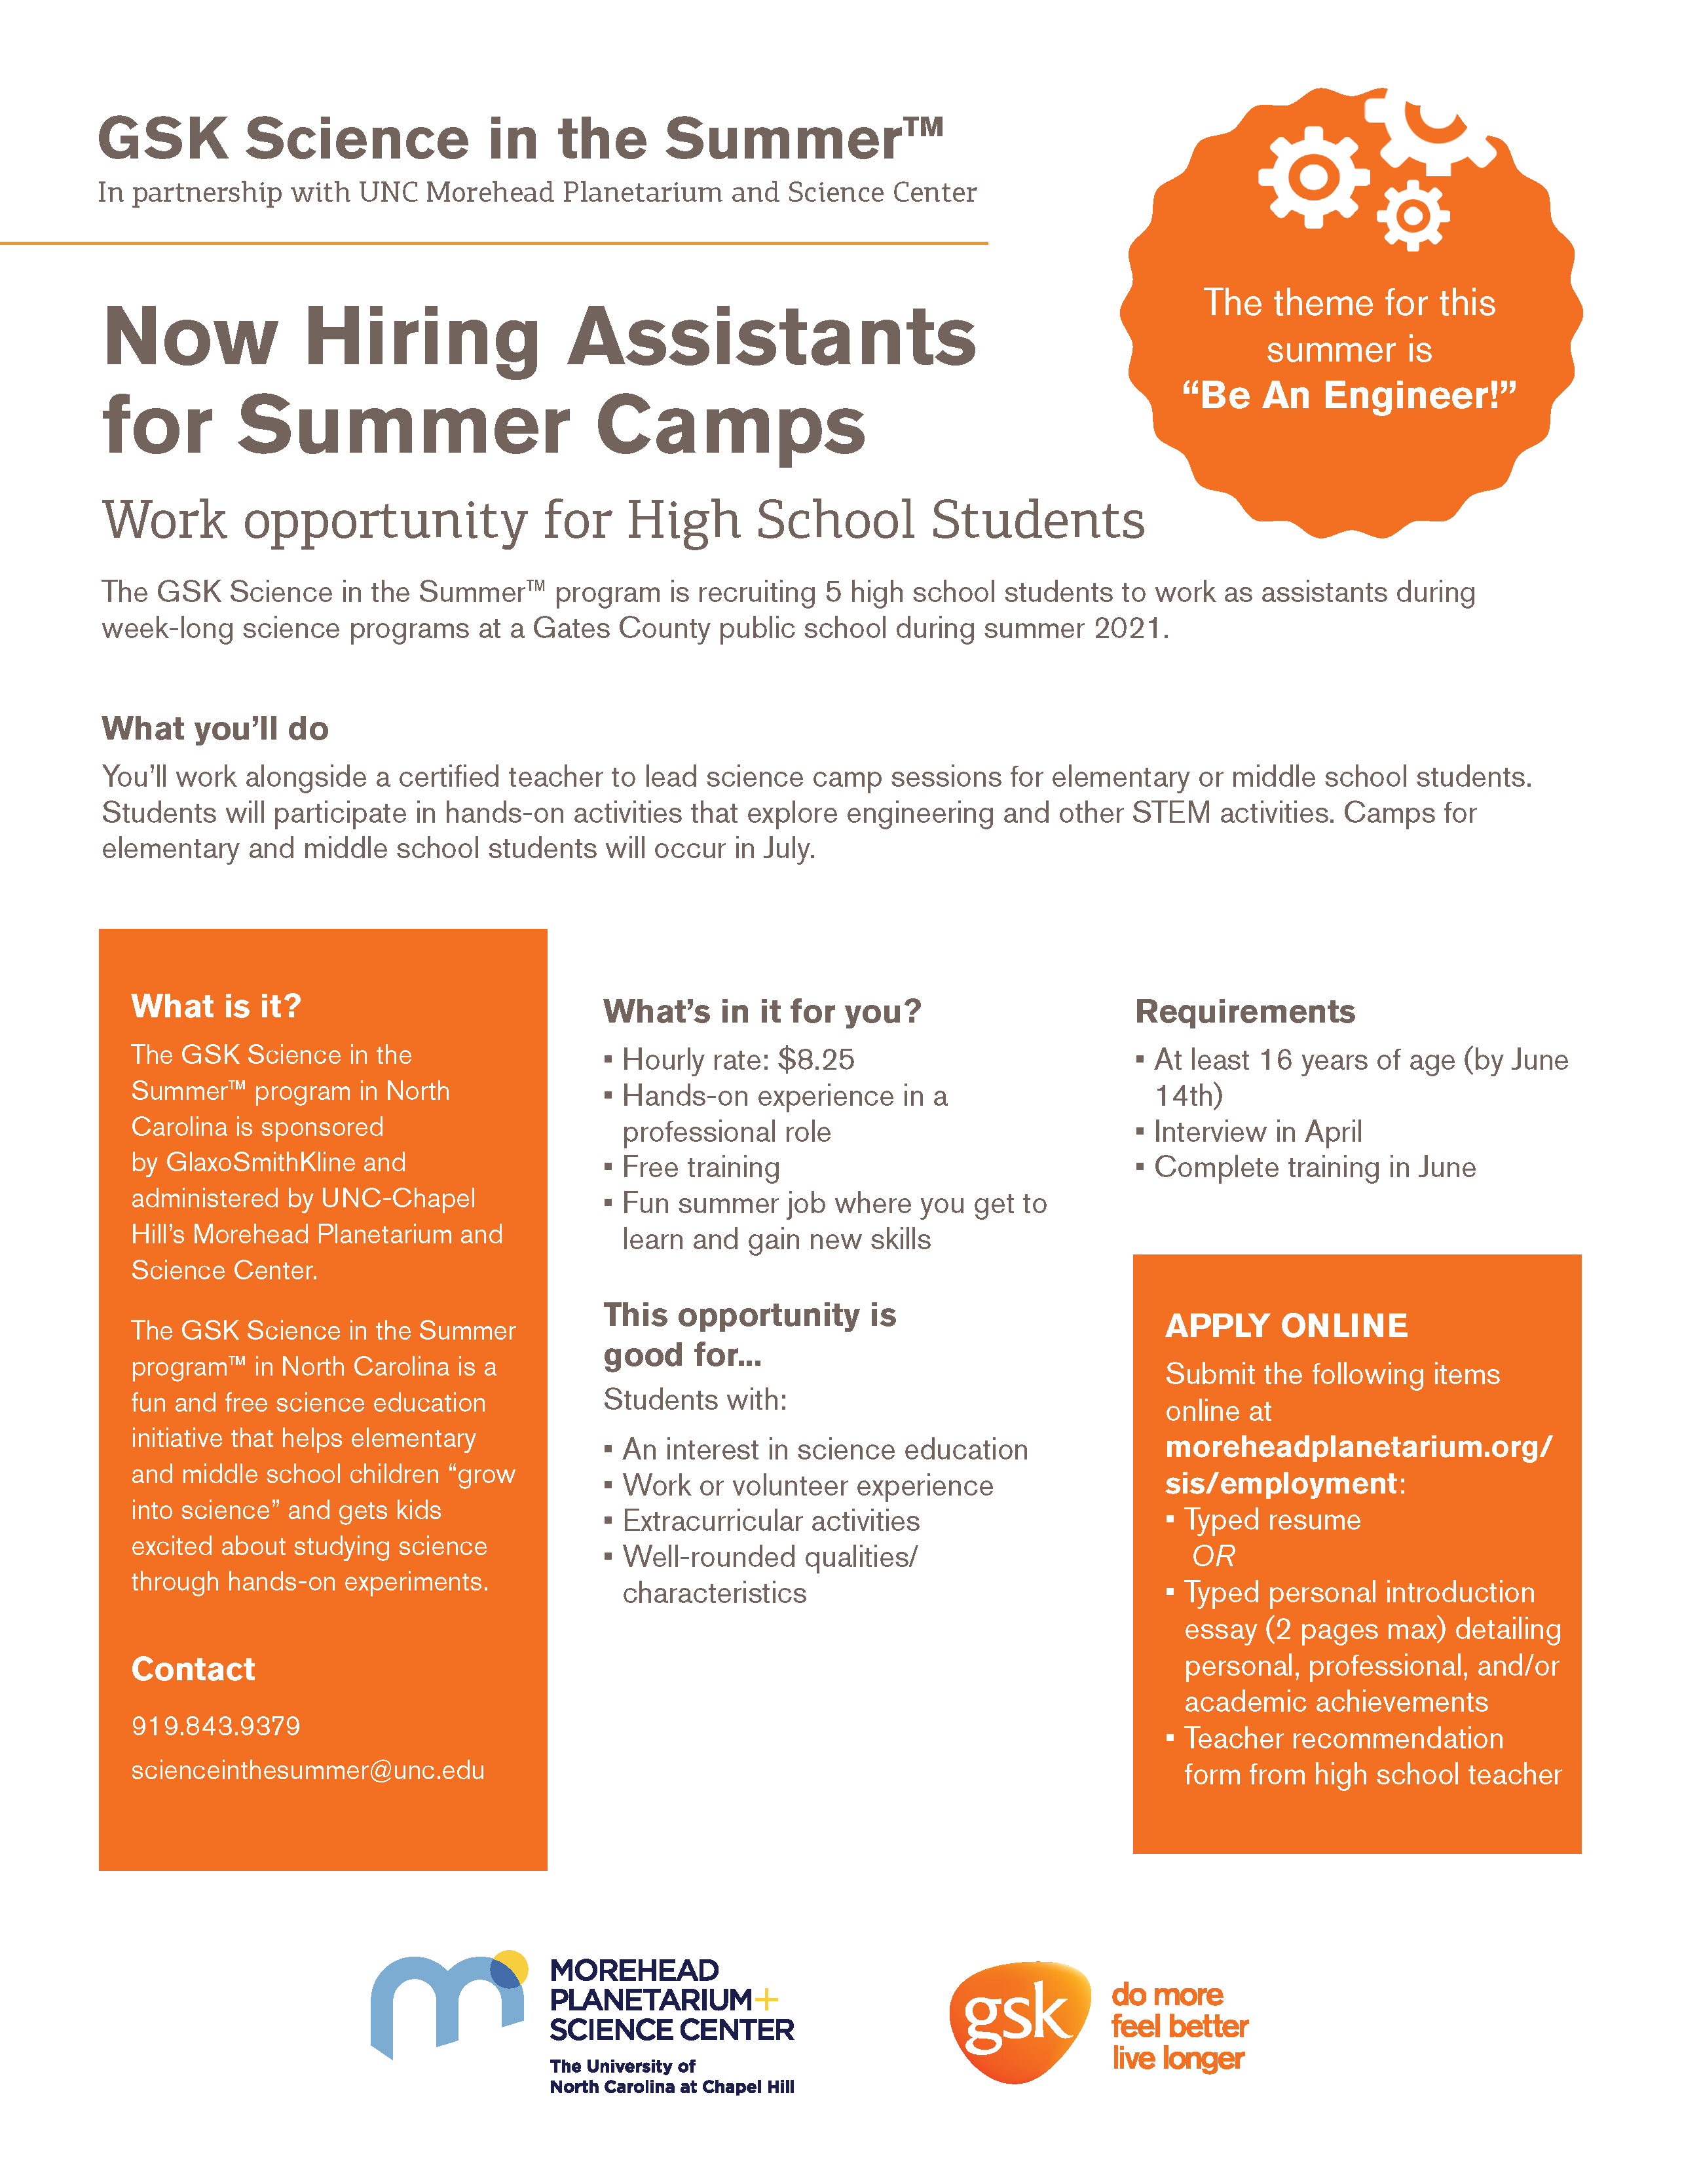 GSK Science in the Summer Employment Opportunities in Gates County